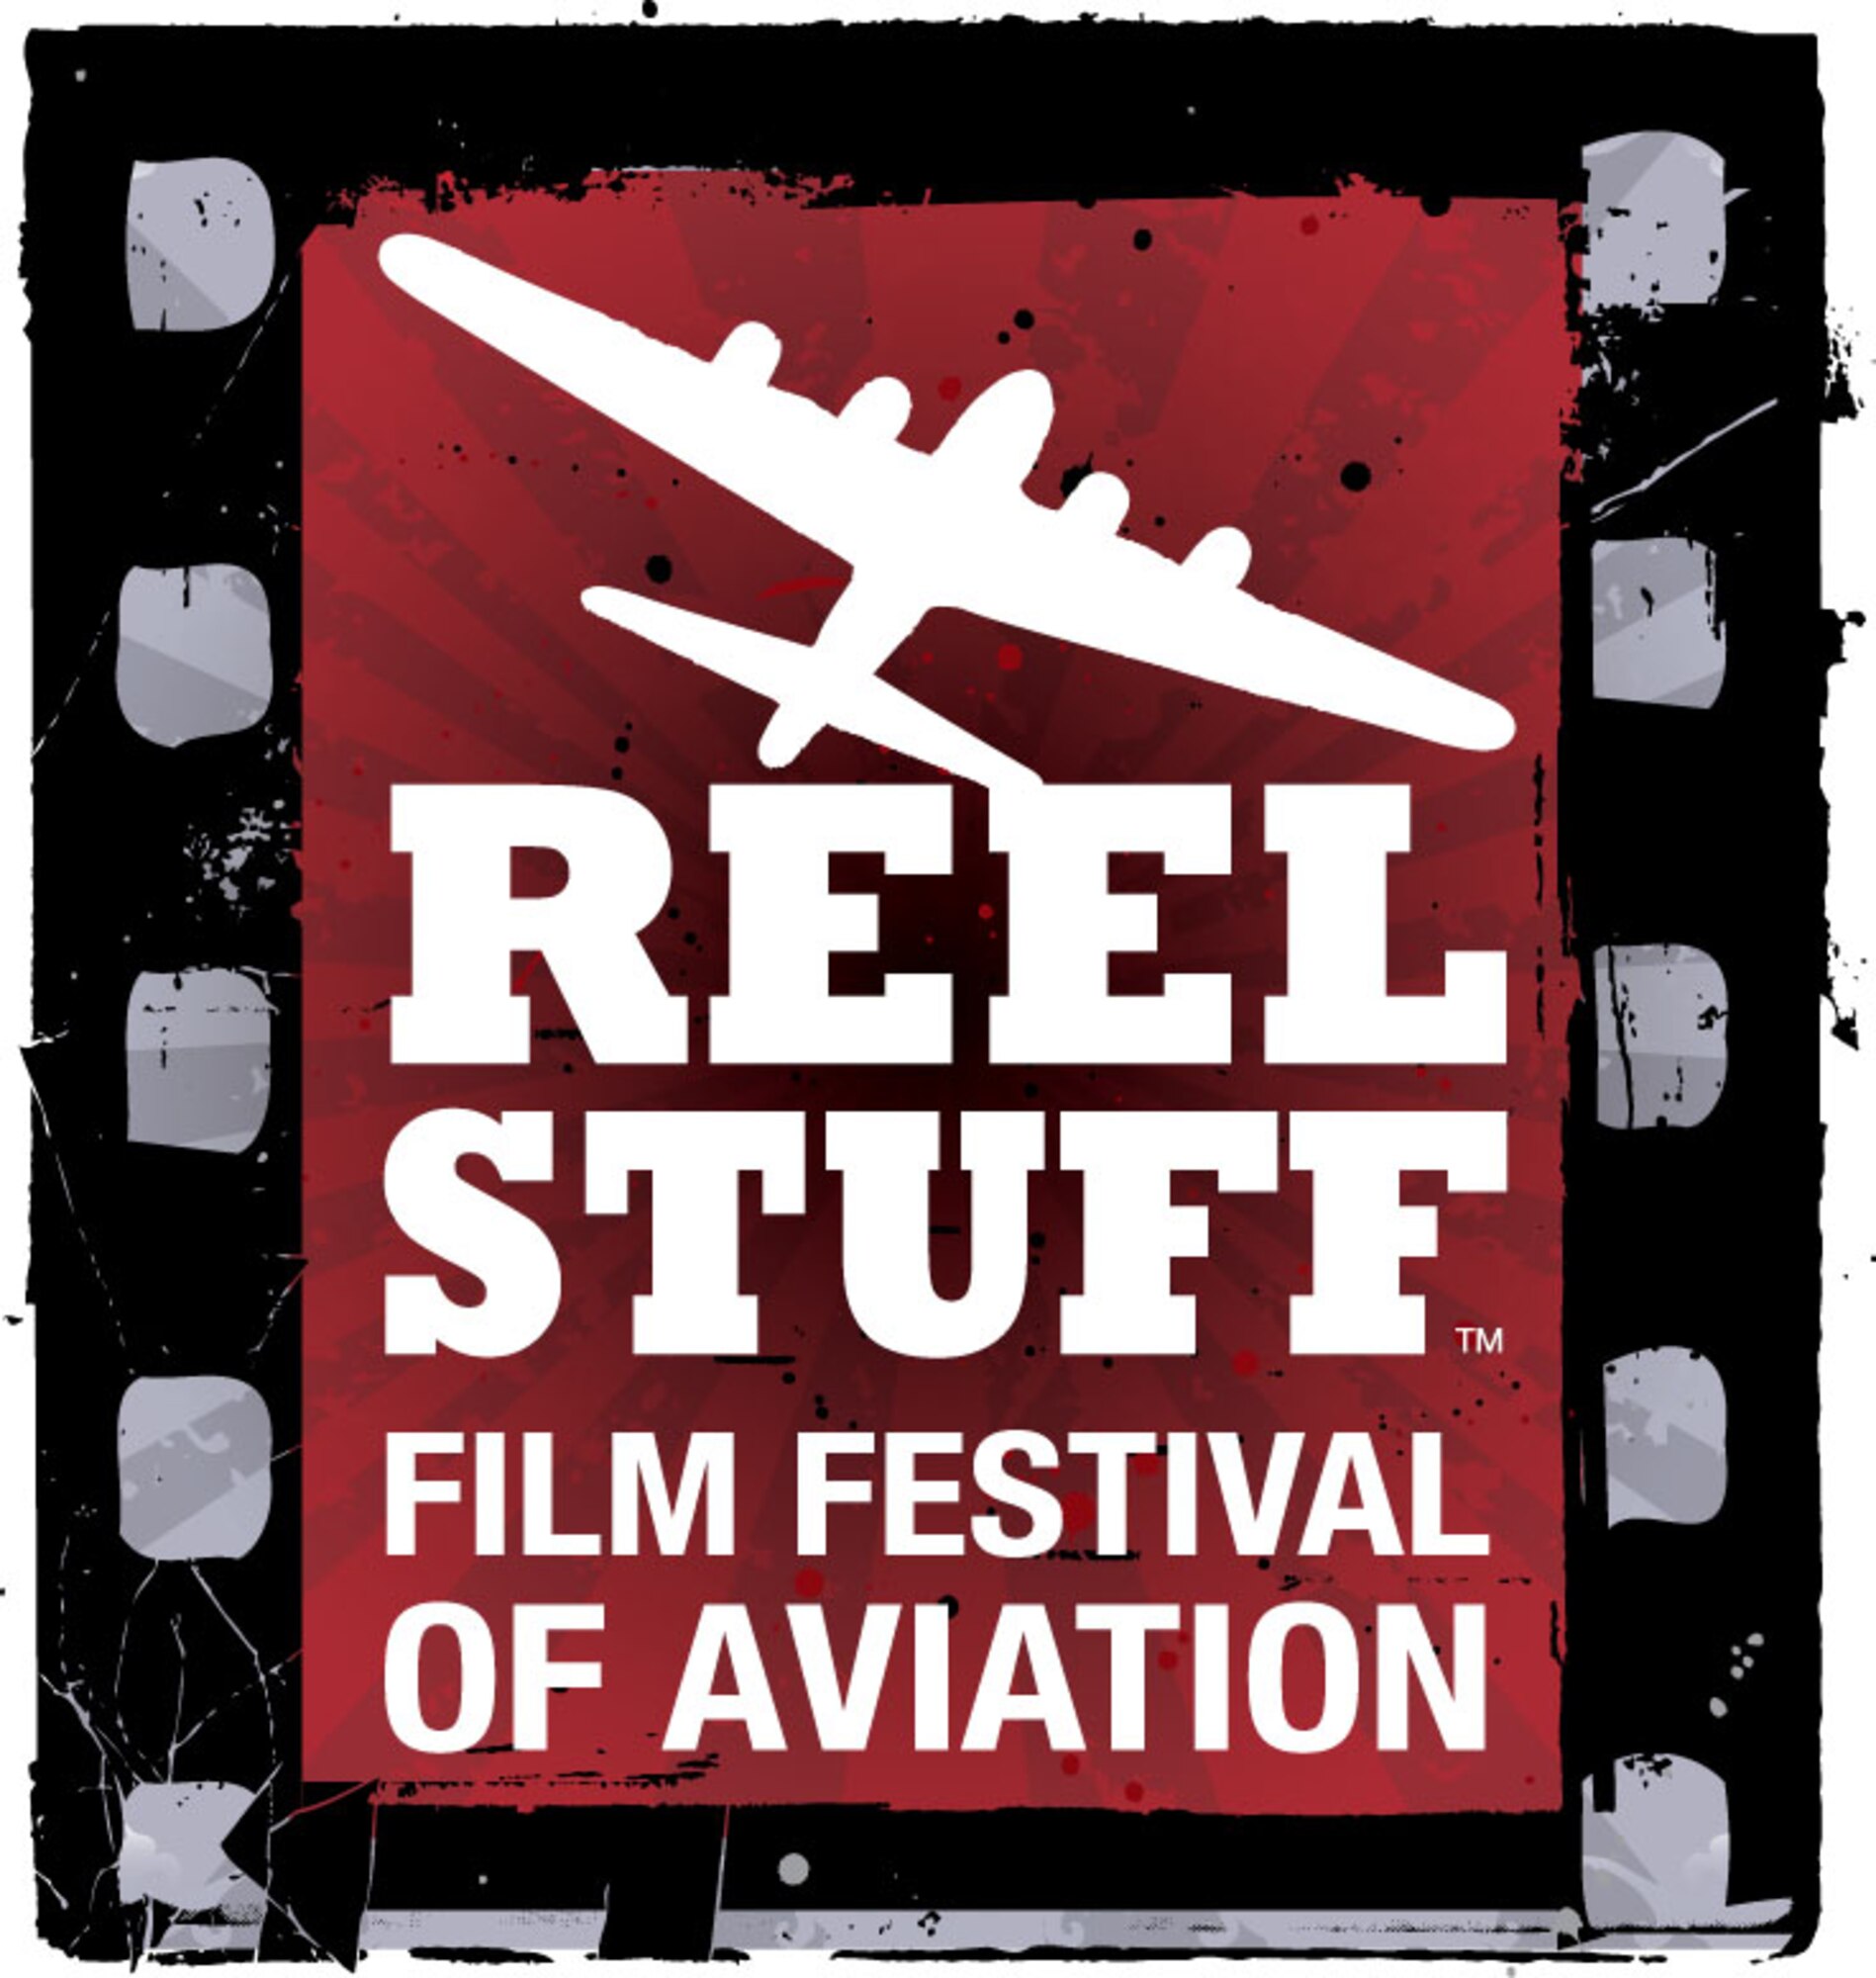 The Reel Stuff Film Festival of Aviation will take place at the Air Force Museum Theatre on April 12-14, 2013.